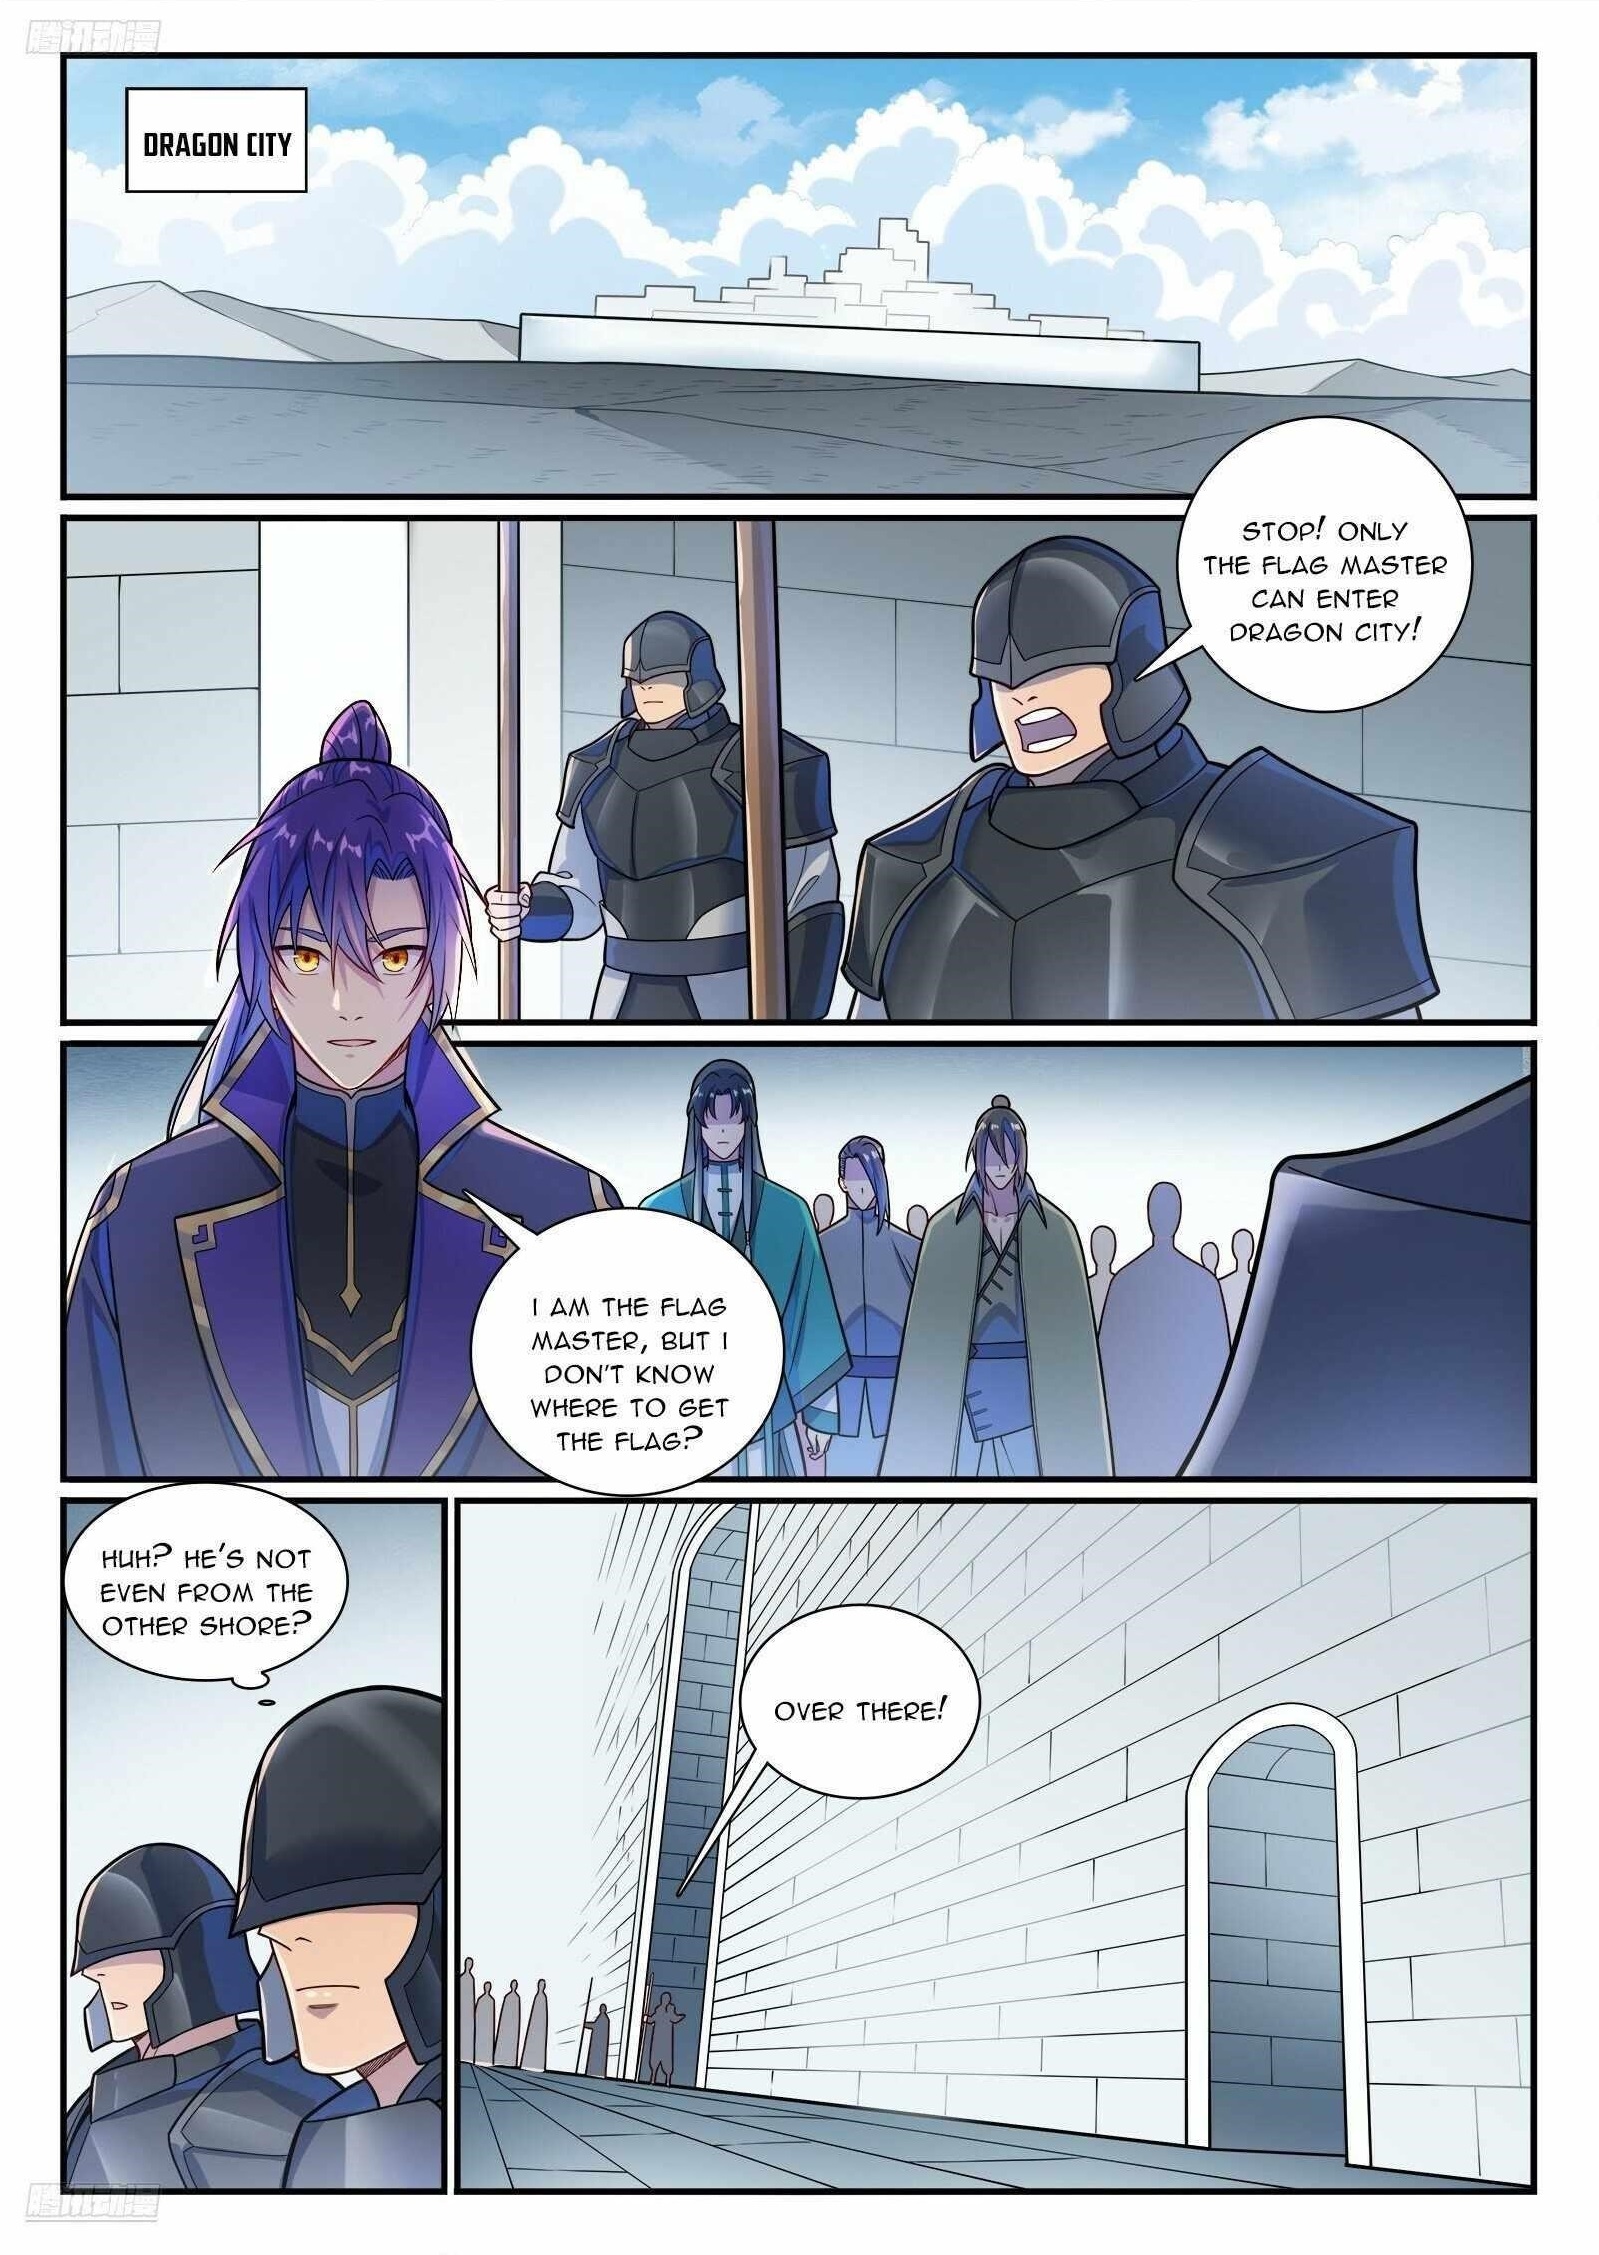 APOTHEOSIS Chapter 1171 - Page 1